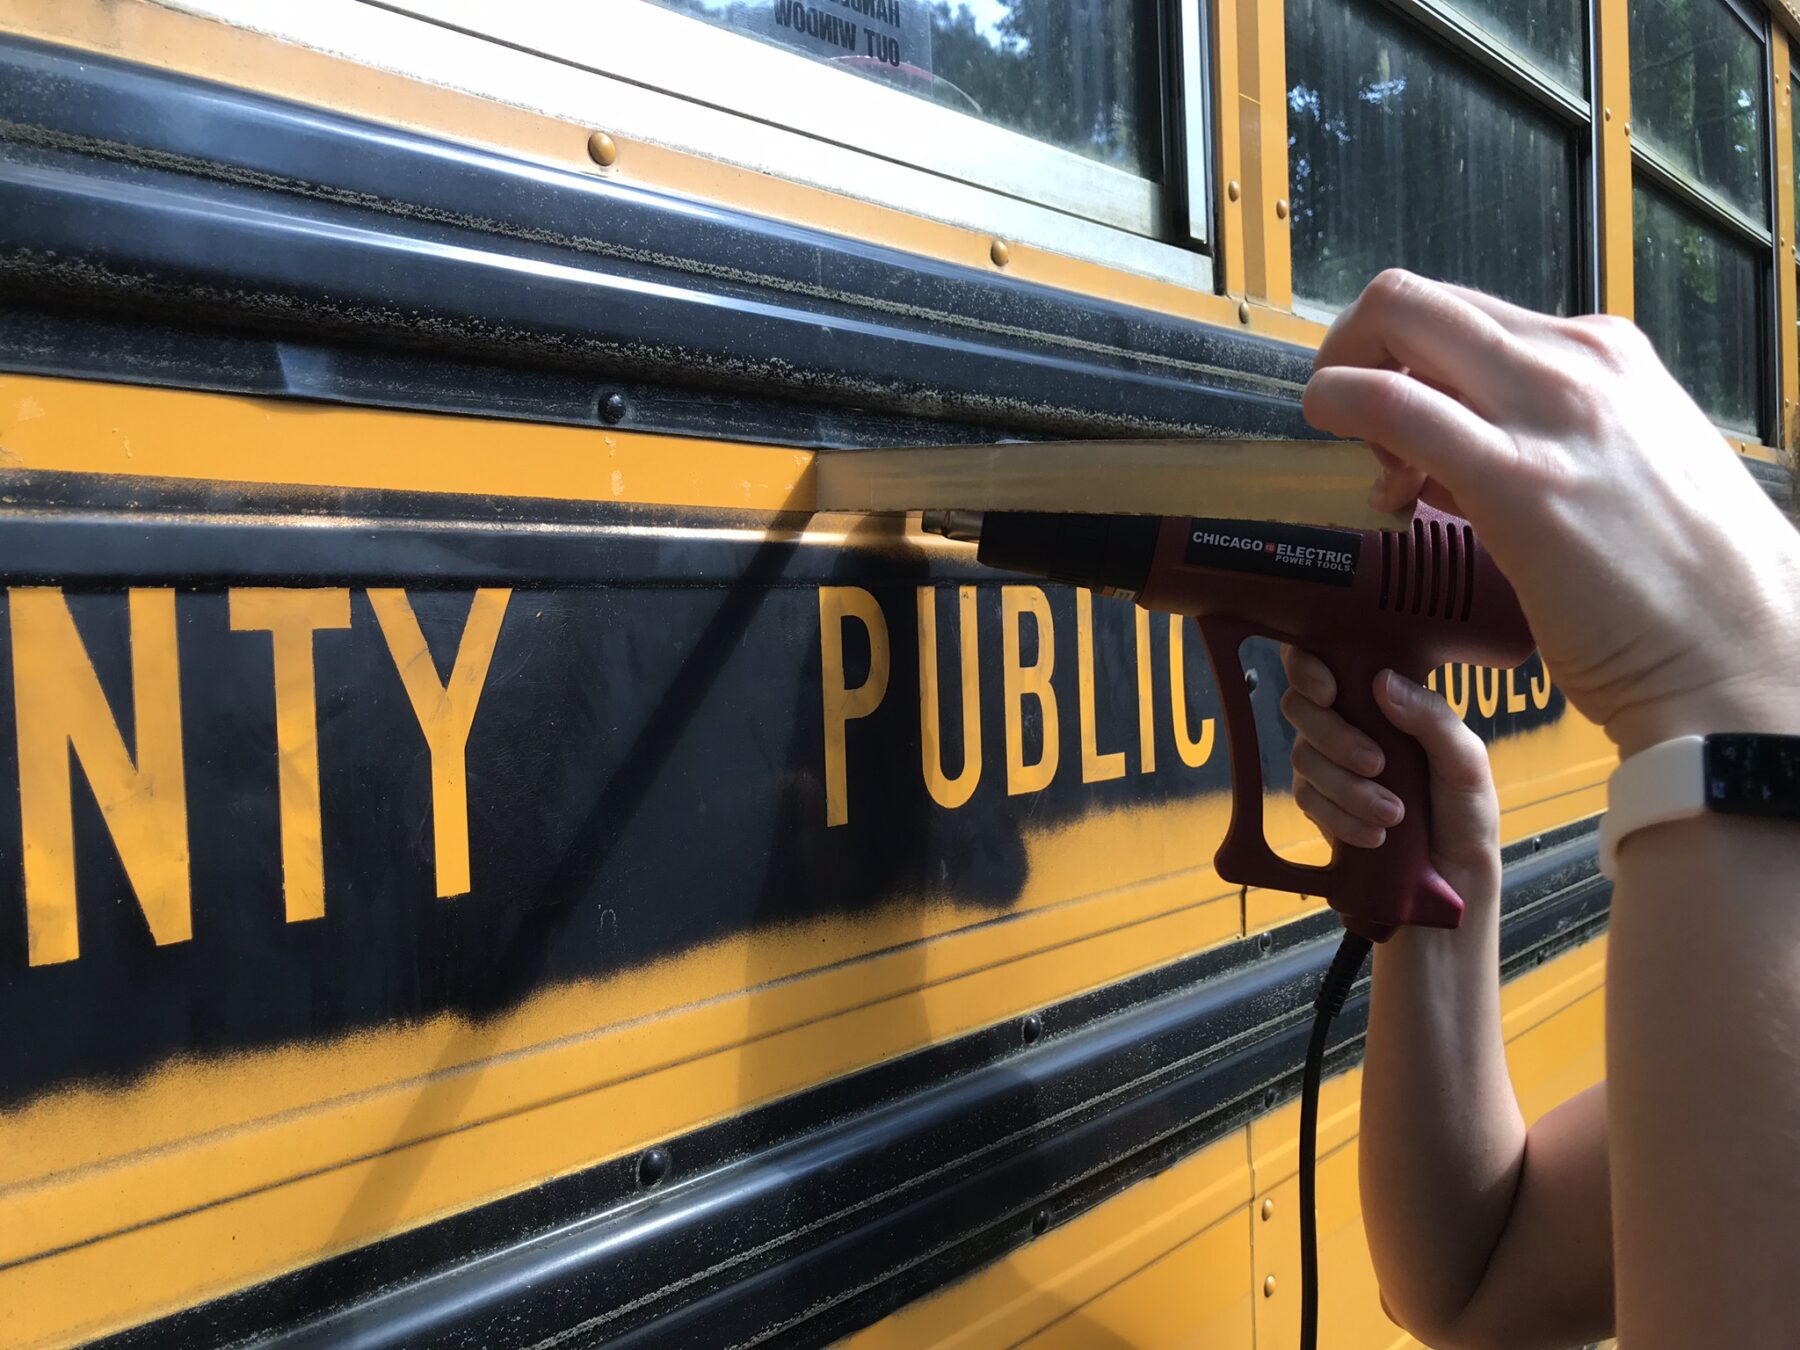 Using a heat gun to remove reflective tape from the bus